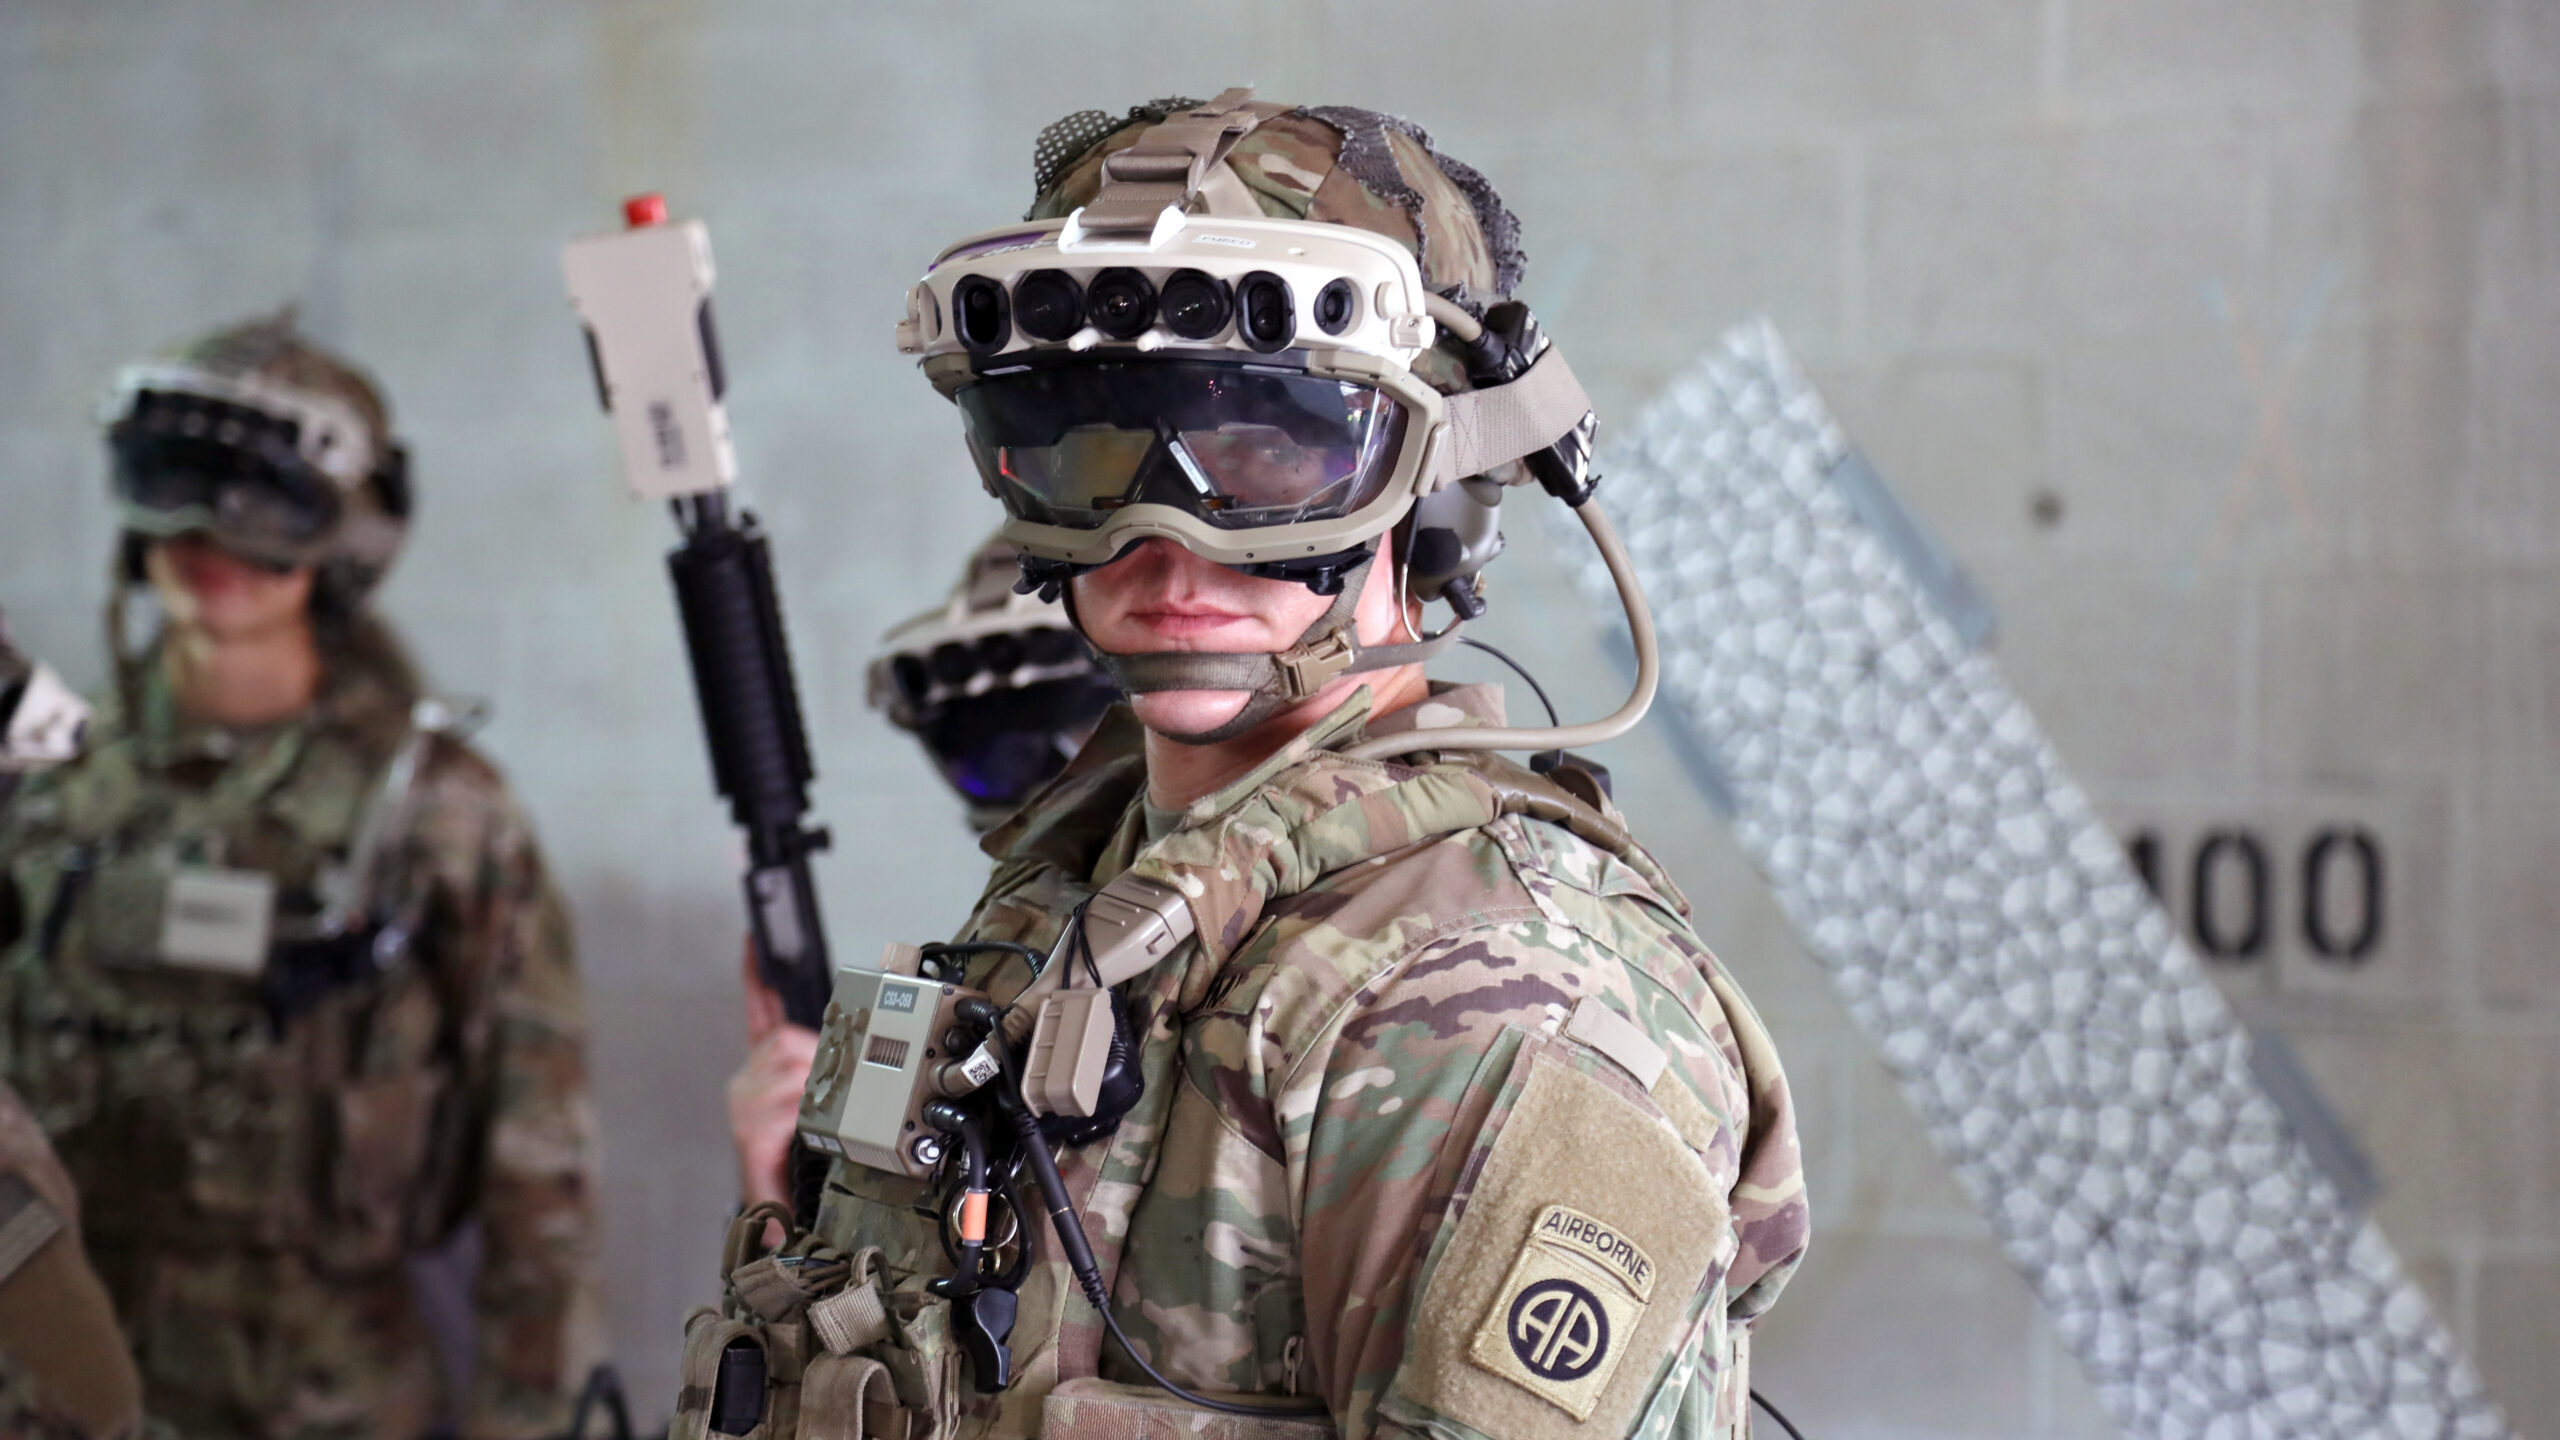 From software to AR goggles: 4 takeaways from Army’s new acquisition chief